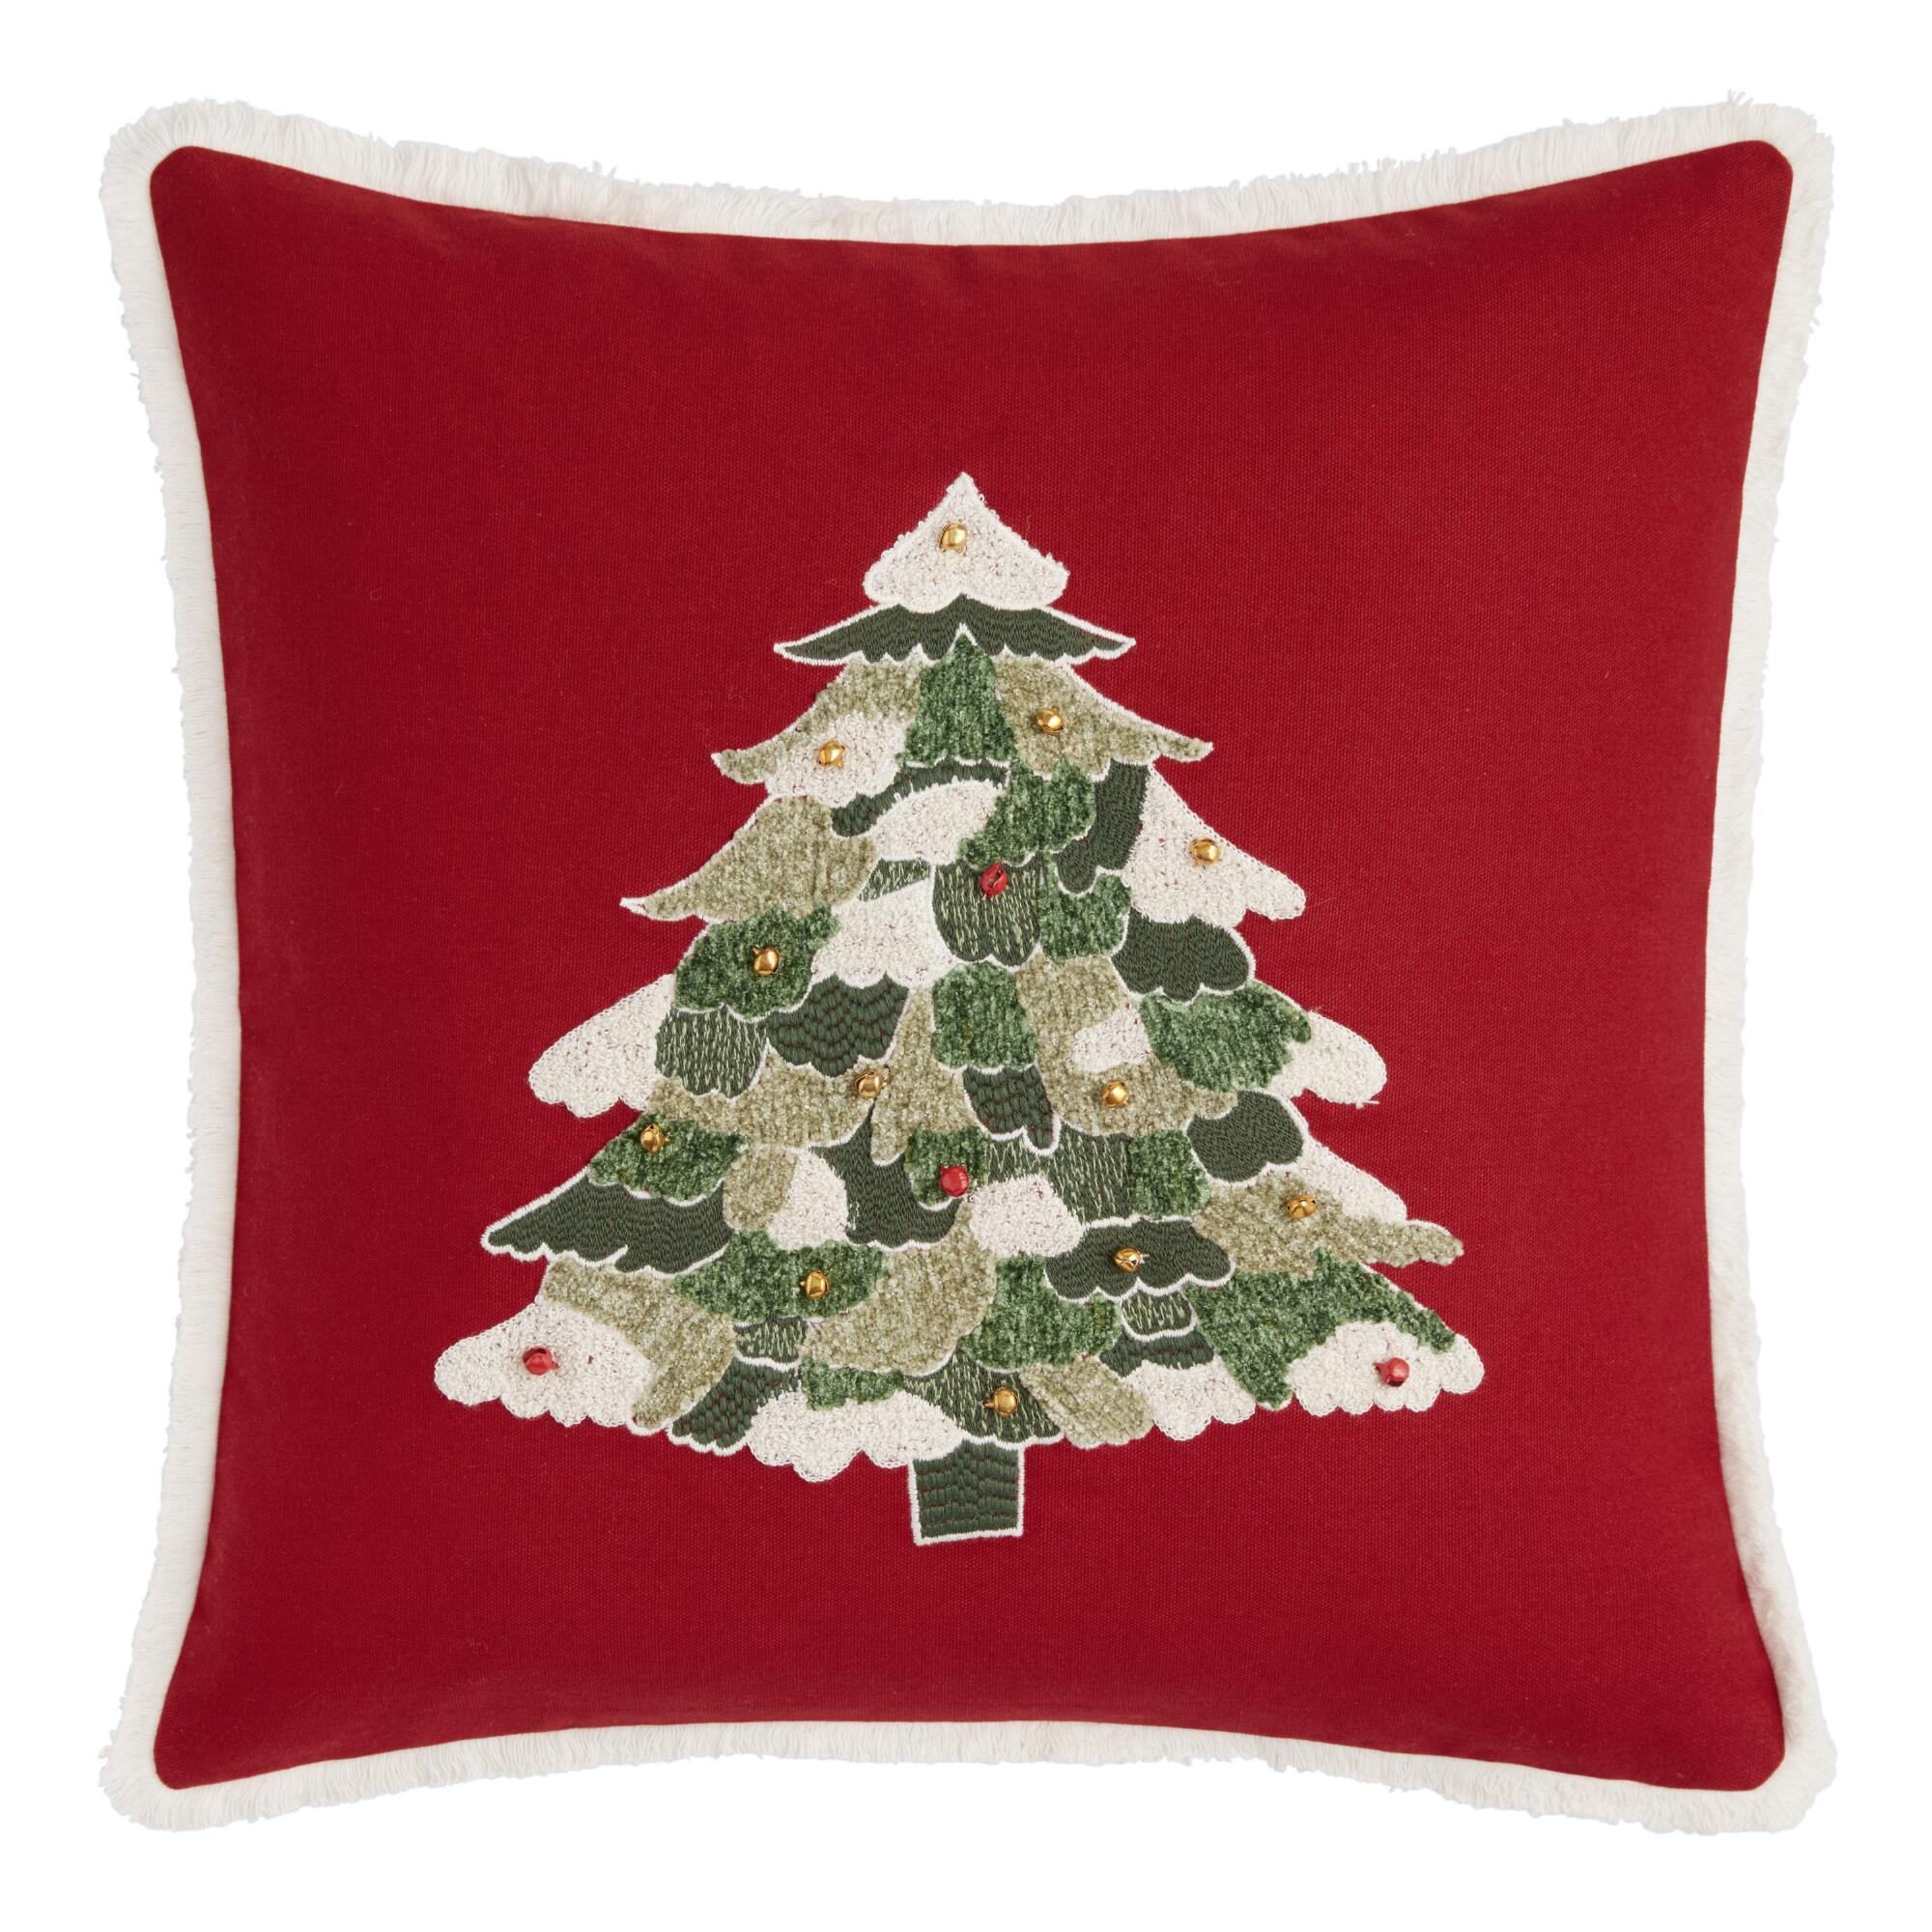 Pier Place Red Festive Tree Embroidered Throw Pillow: Green/Red - Cotton - 18" Square by World Market